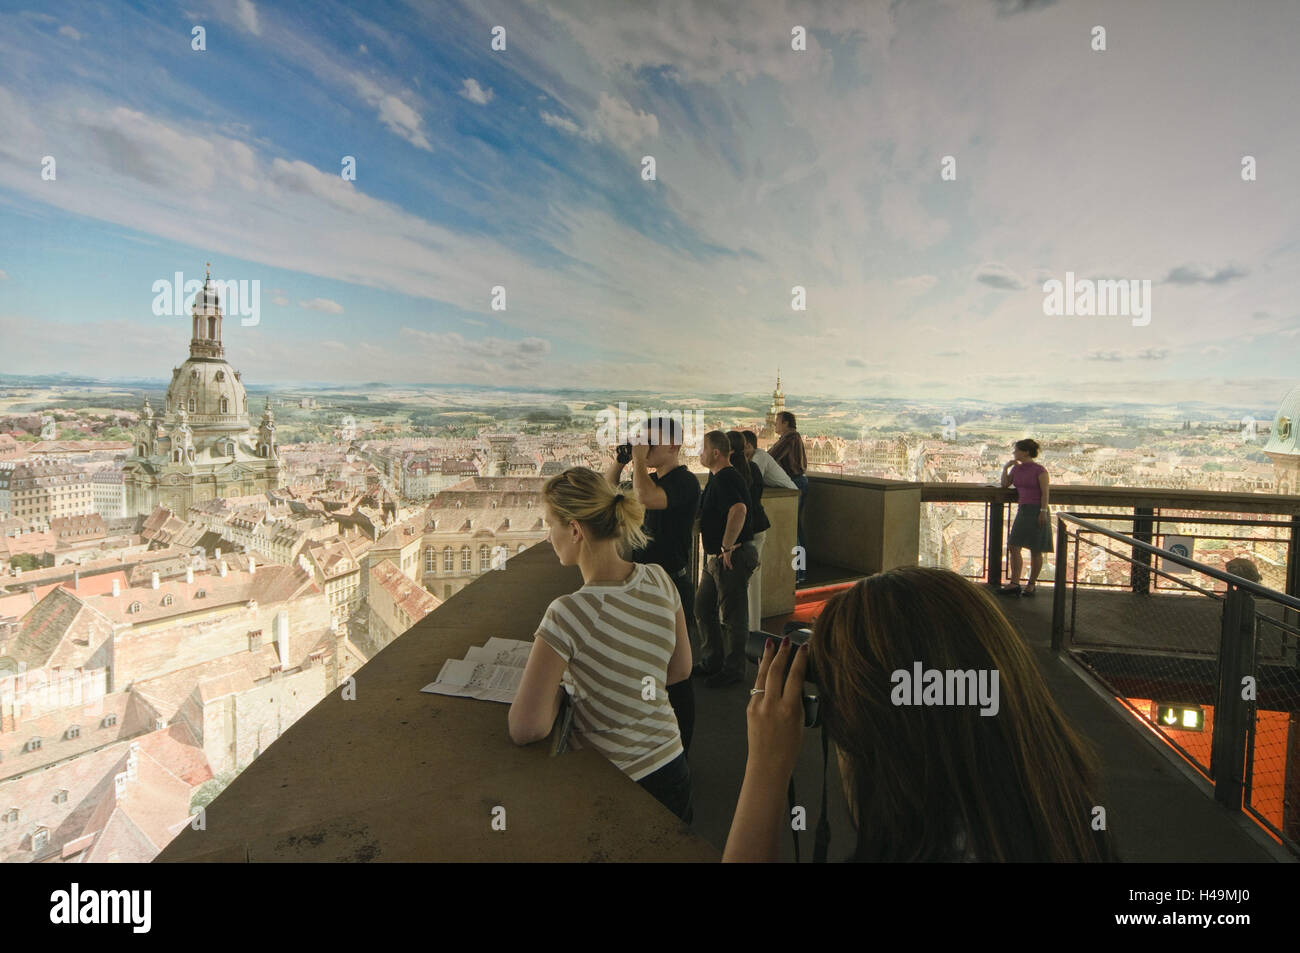 Asisi Panometer, Dresden, panorama from 1756, visitors on observation terrace, Reick, Dresden, Saxony, Germany, Stock Photo